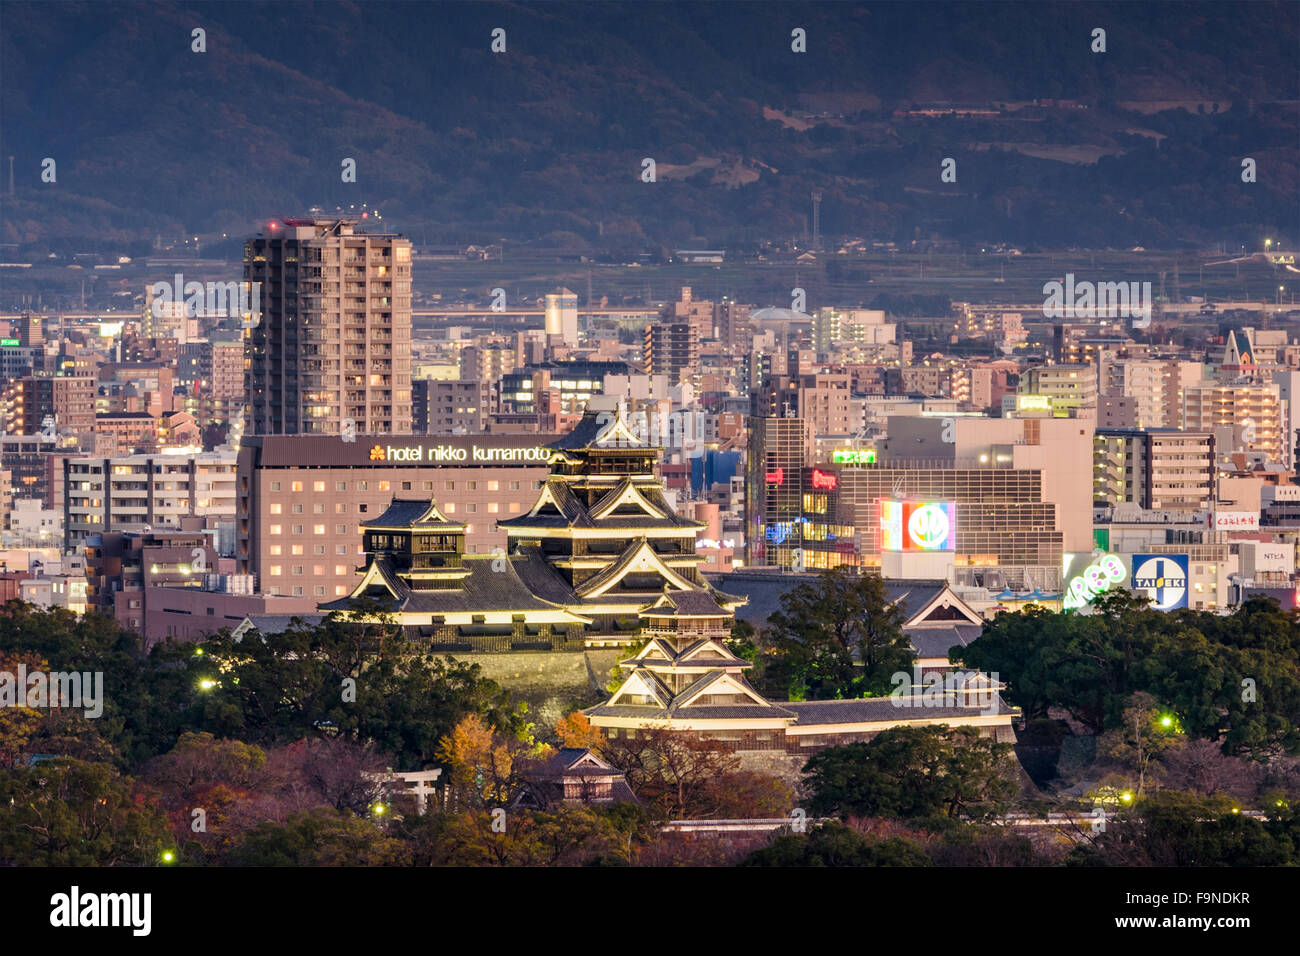 Downtown Kumamoto Japan with the castle. Stock Photo